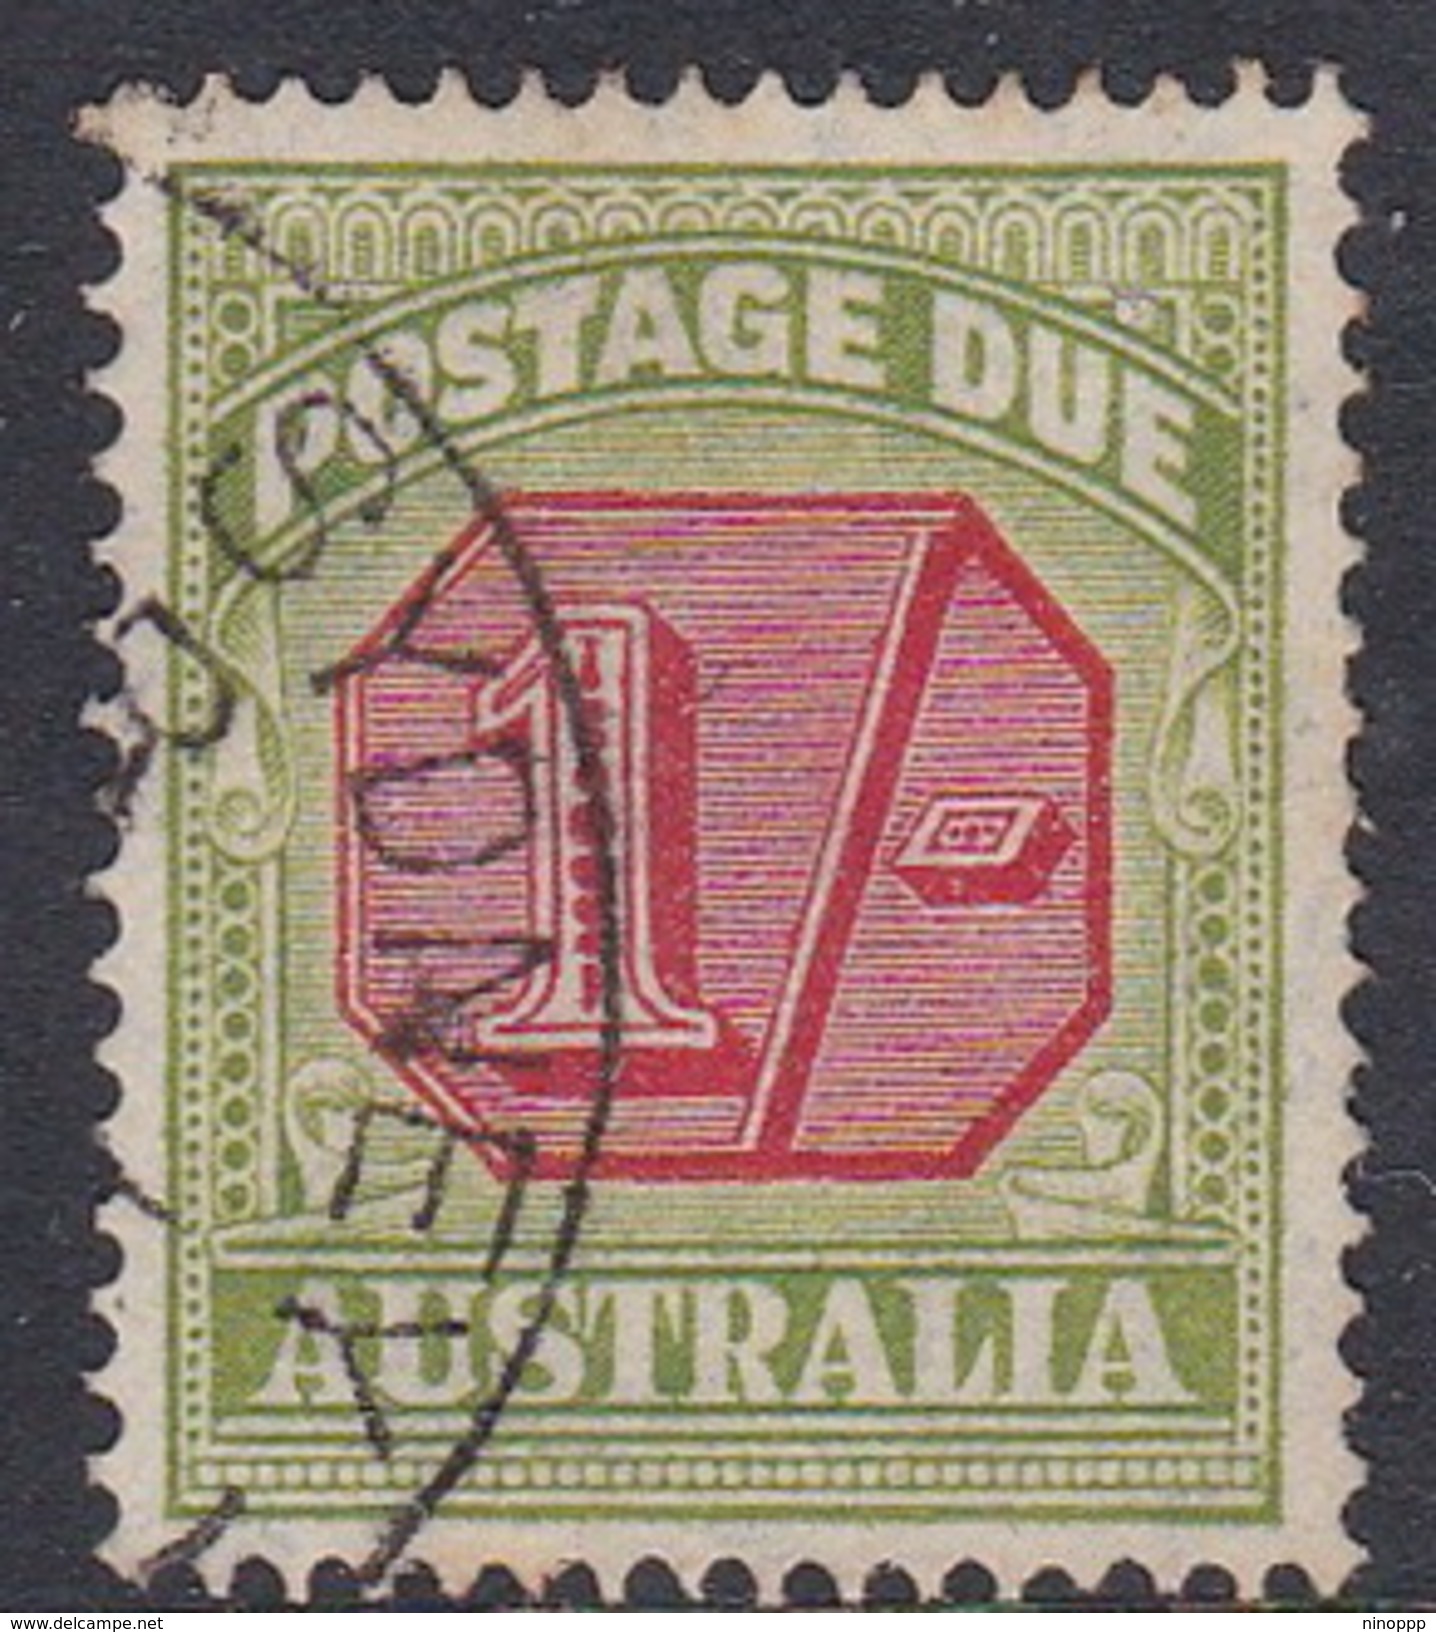 Australia Postage Due Stamps SG D118 1938 One Shilling Used - Impuestos